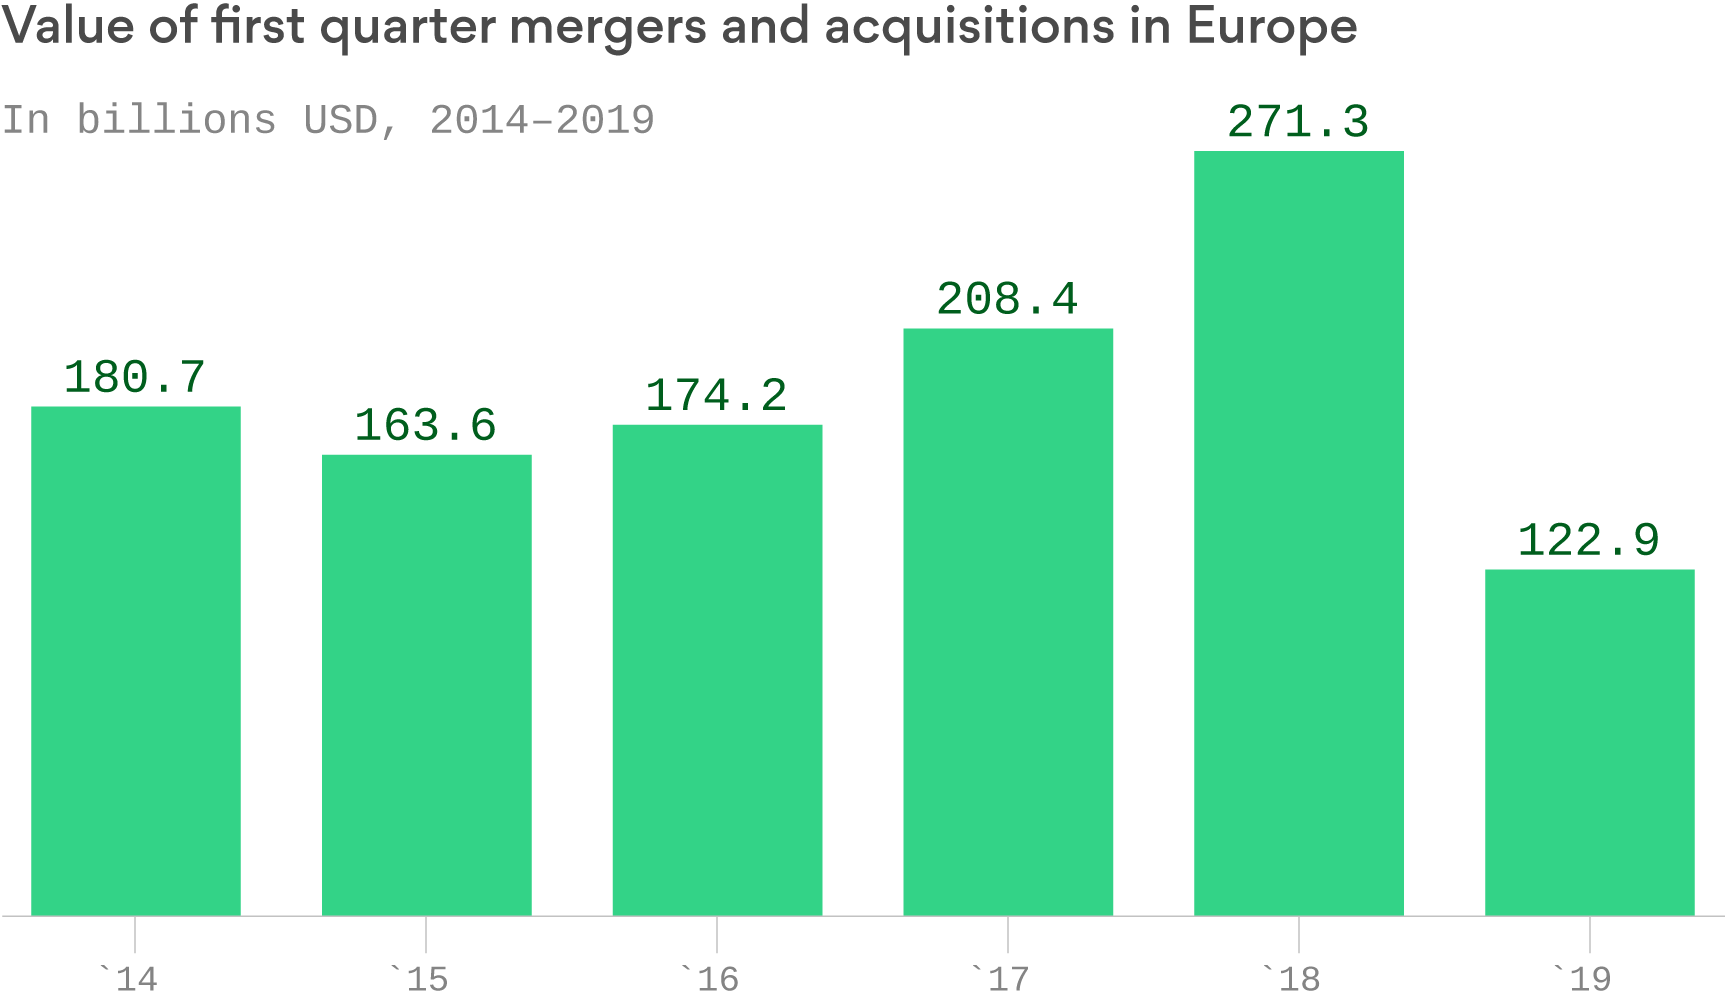 This image shows that 2018 was the highest year for mergers and acquisitions in Europe, and 2019 was the worst year. 